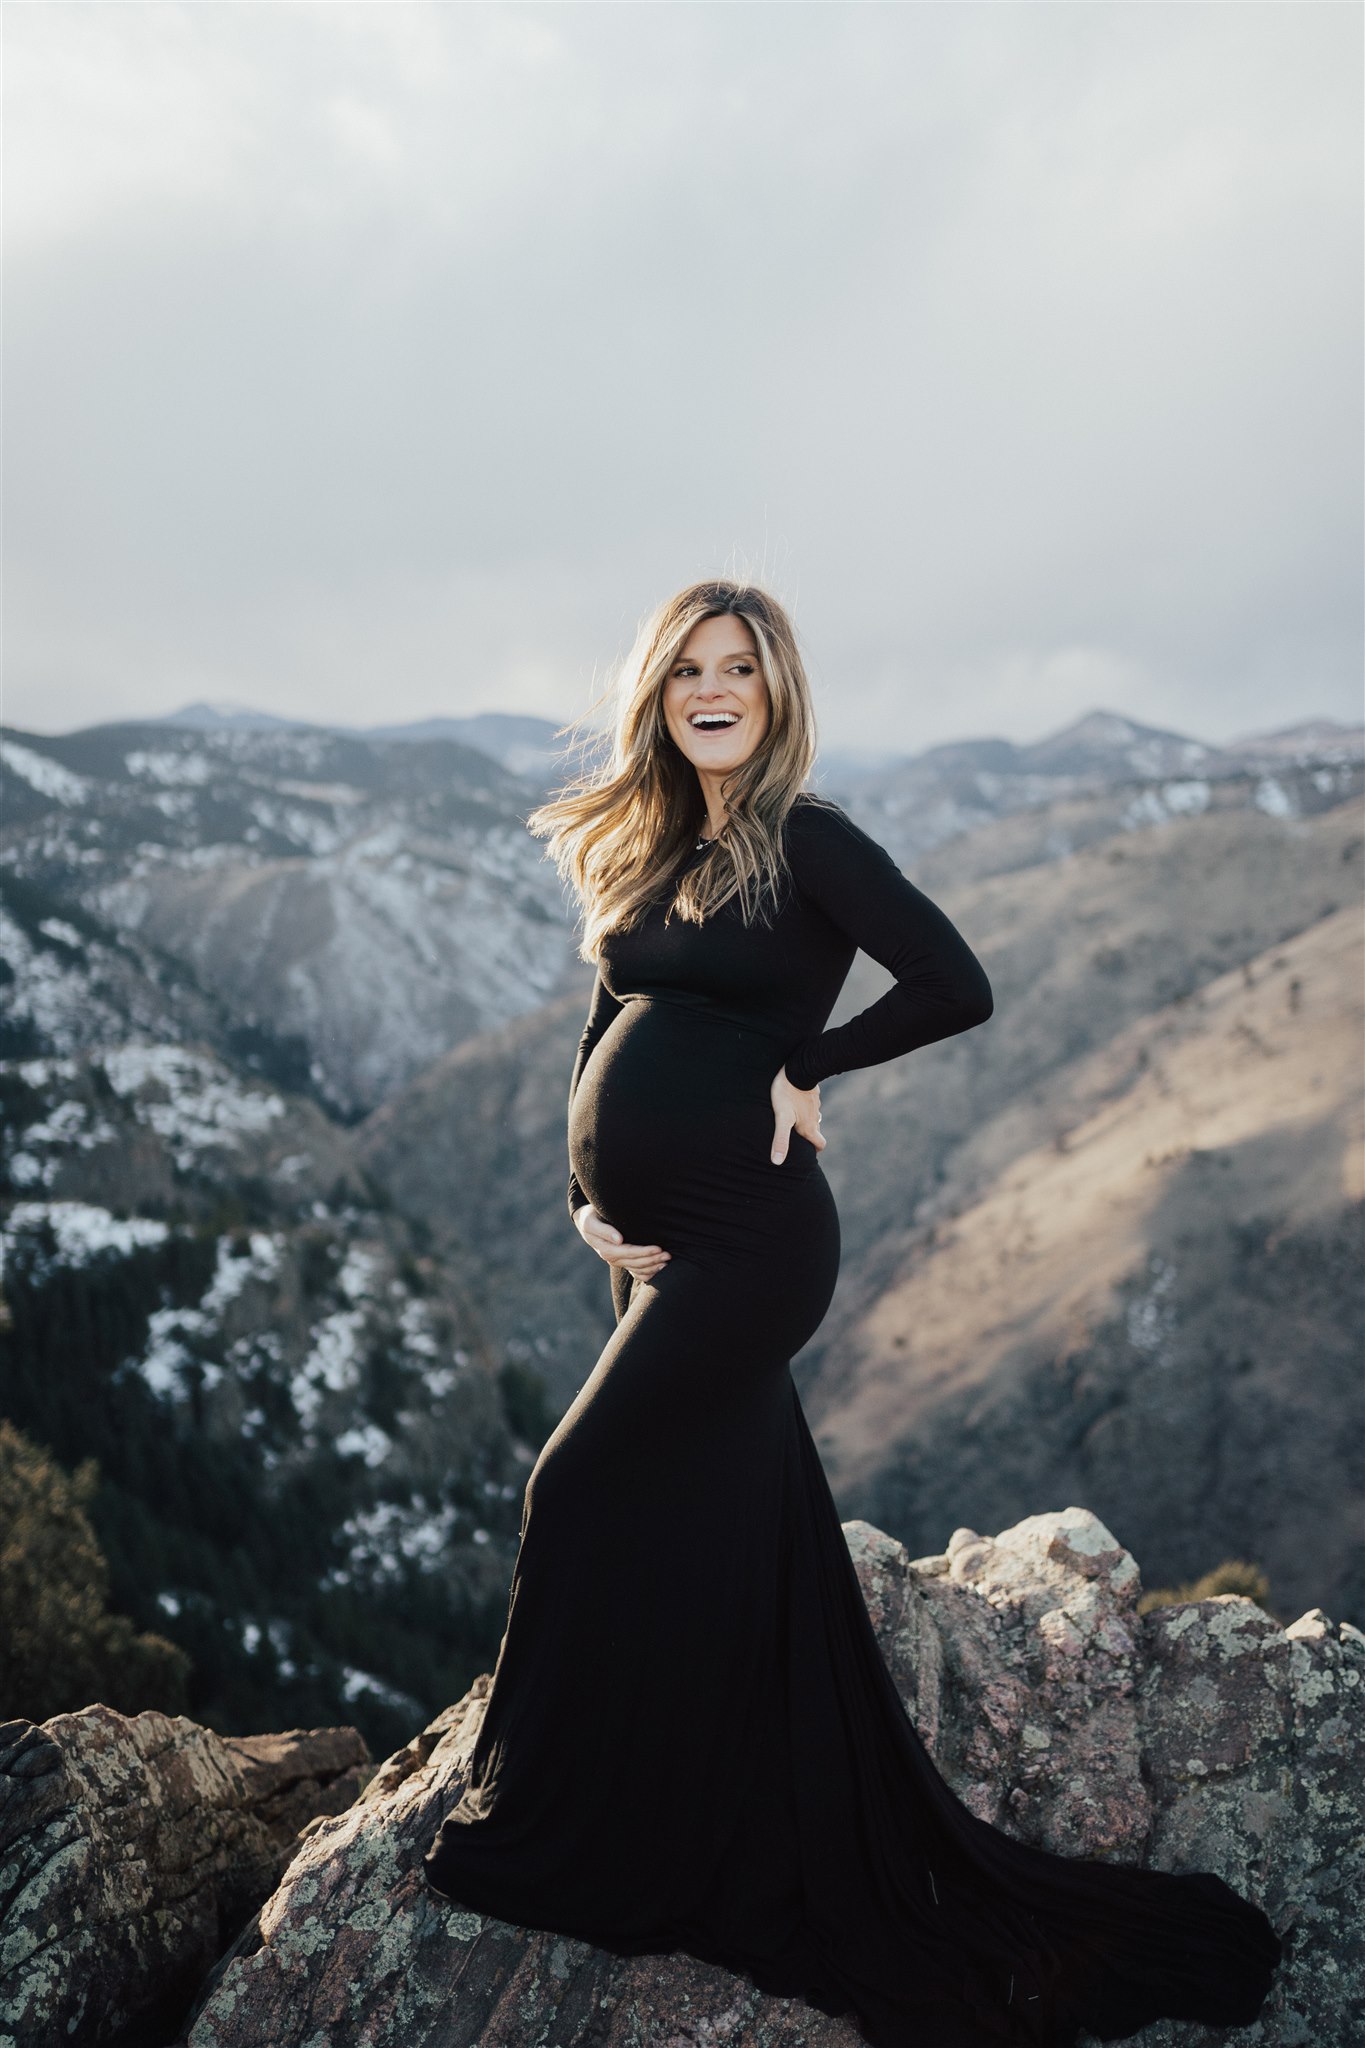 Maternity photos brighton and duncan 30 weeks, mountain maternity photos, long black dress, second trimester q&a